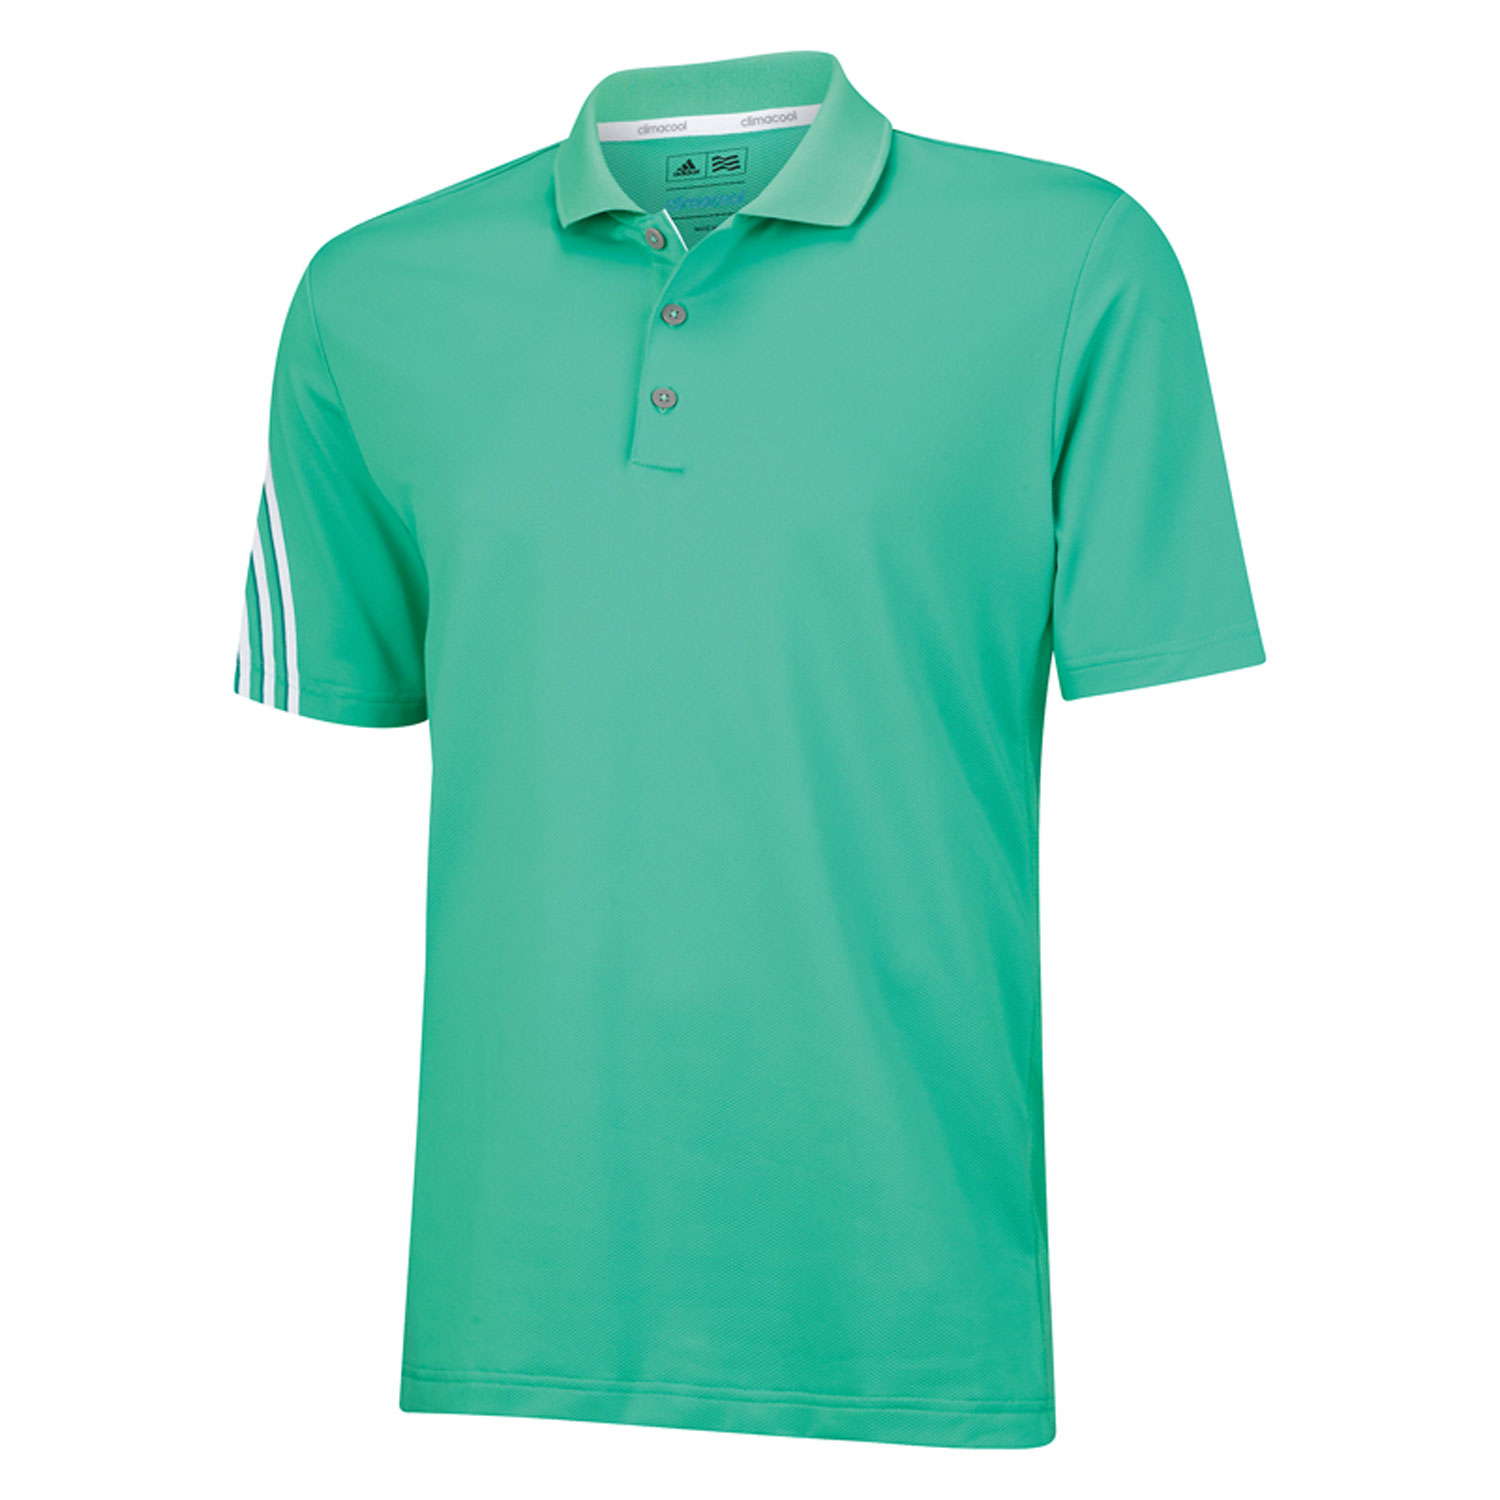 ClimaCool 3 Stripes Men's Polo BRIGHT GREEN /WHITE/POWER GREEN X-Large